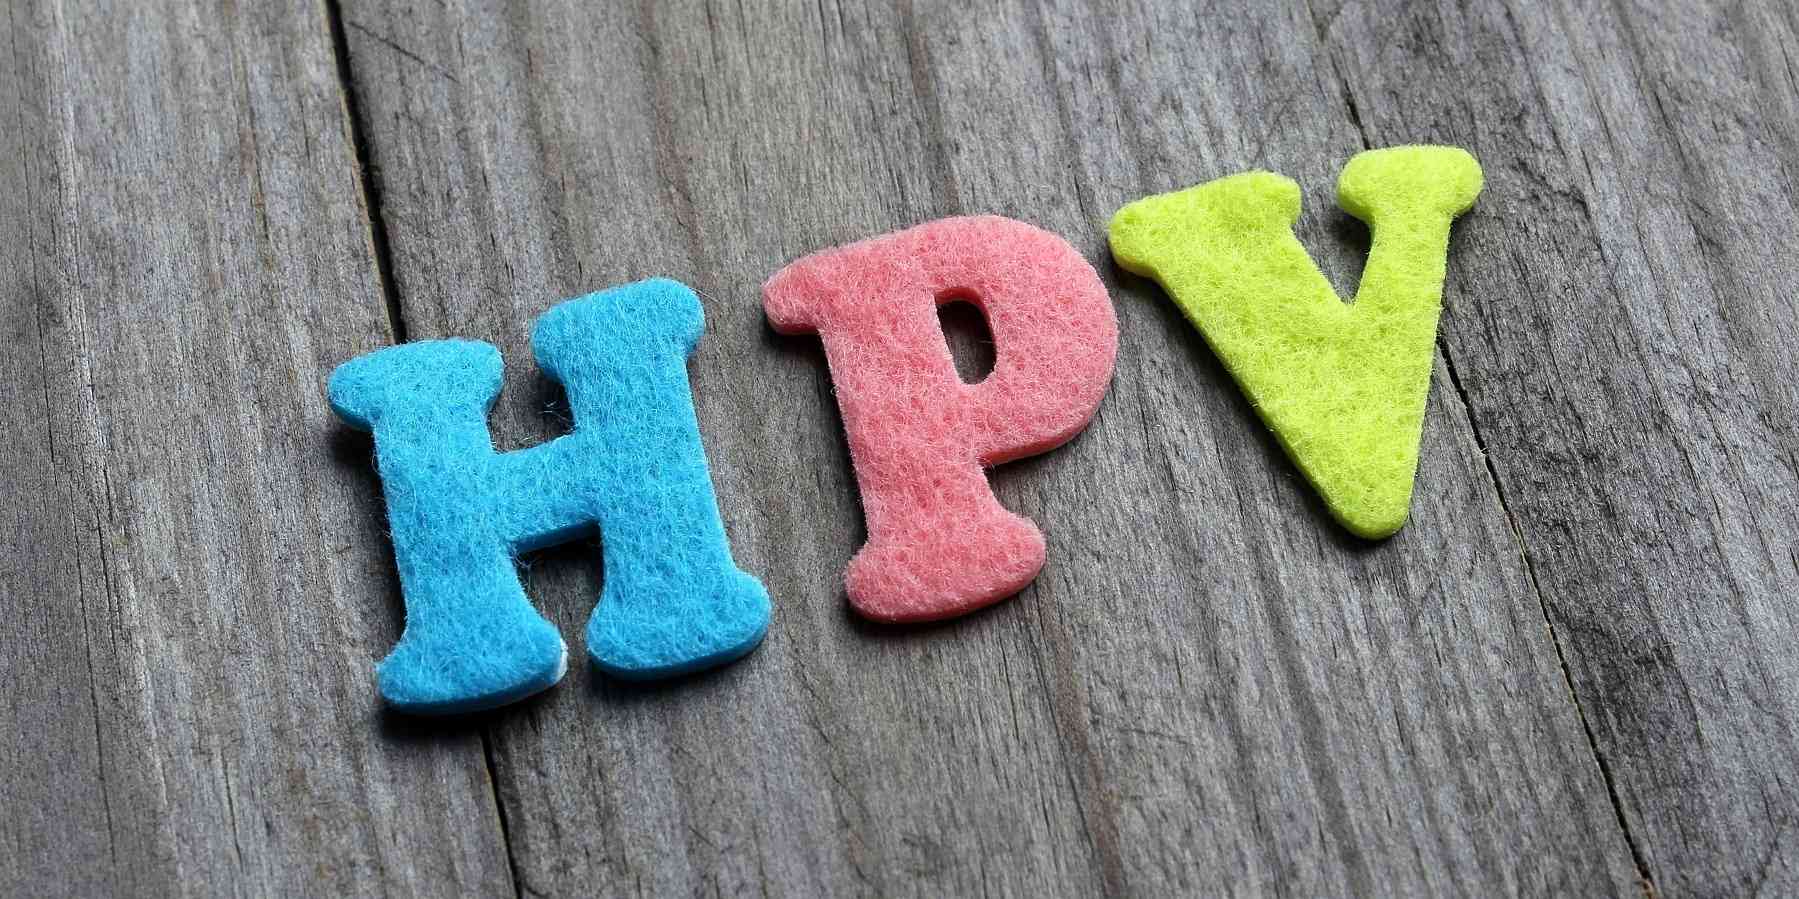 Multicolored cutout of the letters "HPV" against a wooden background